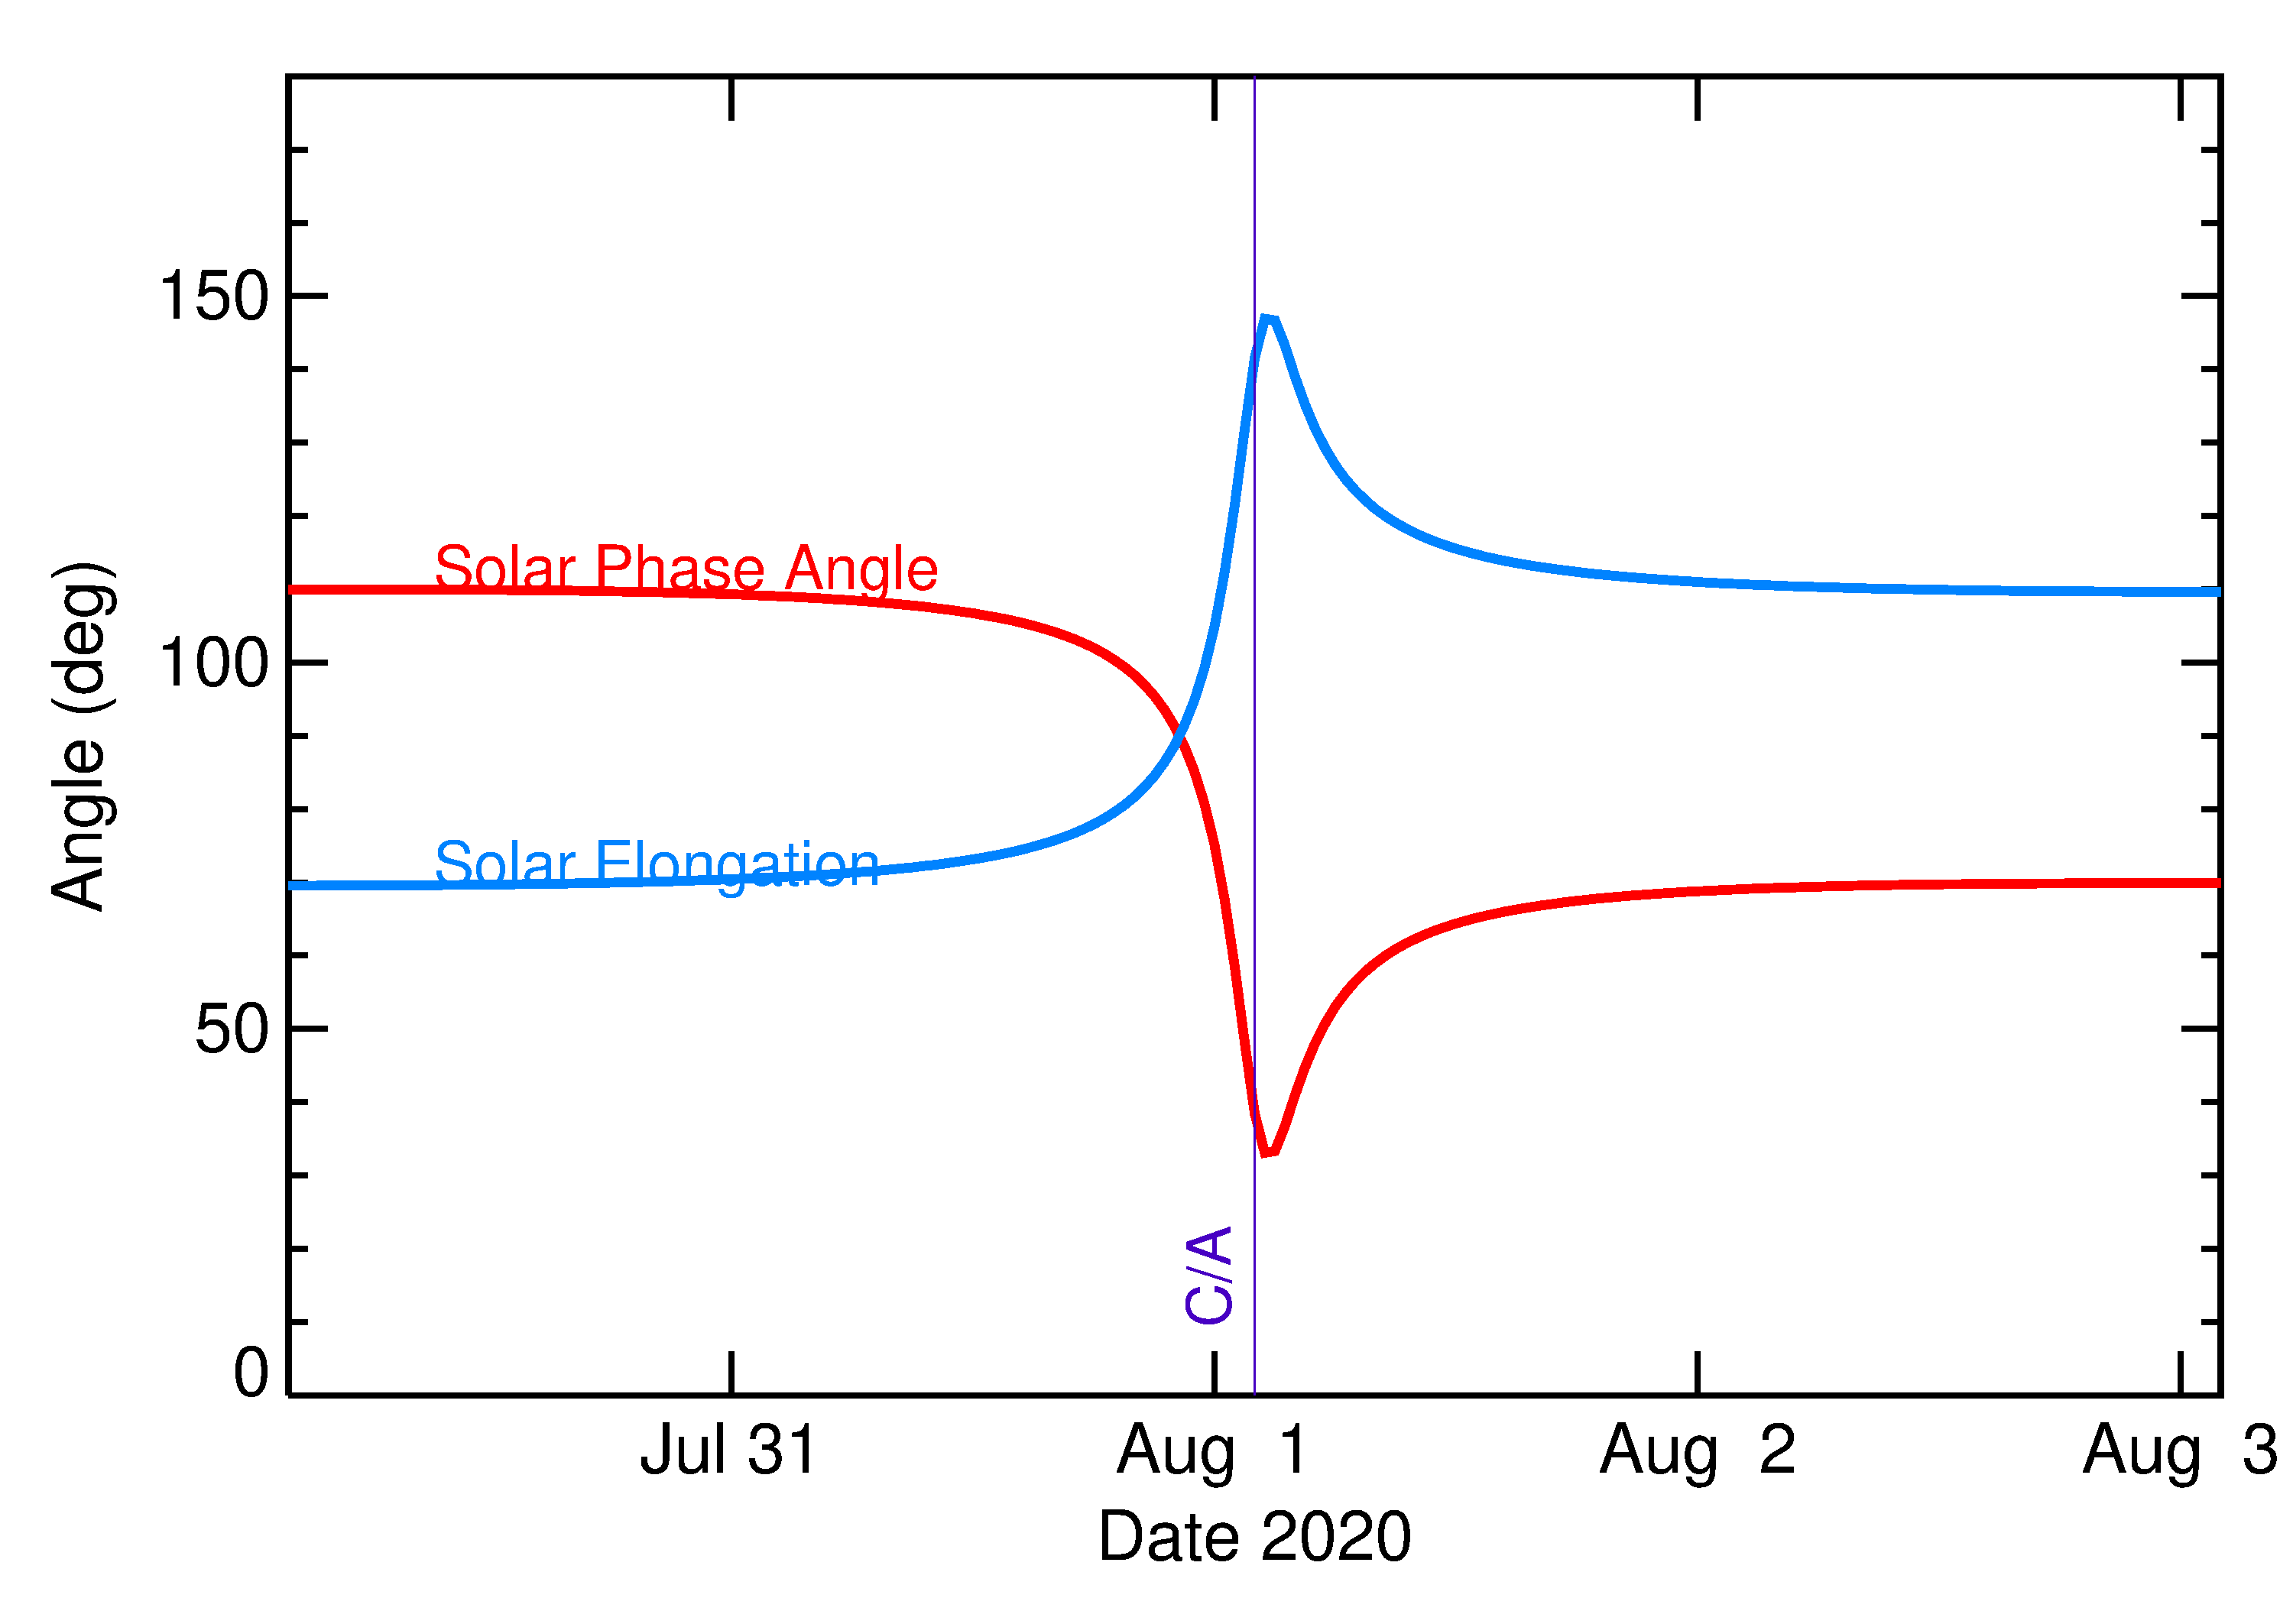 Solar Elongation and Solar Phase Angle of 2020 PA in the days around closest approach